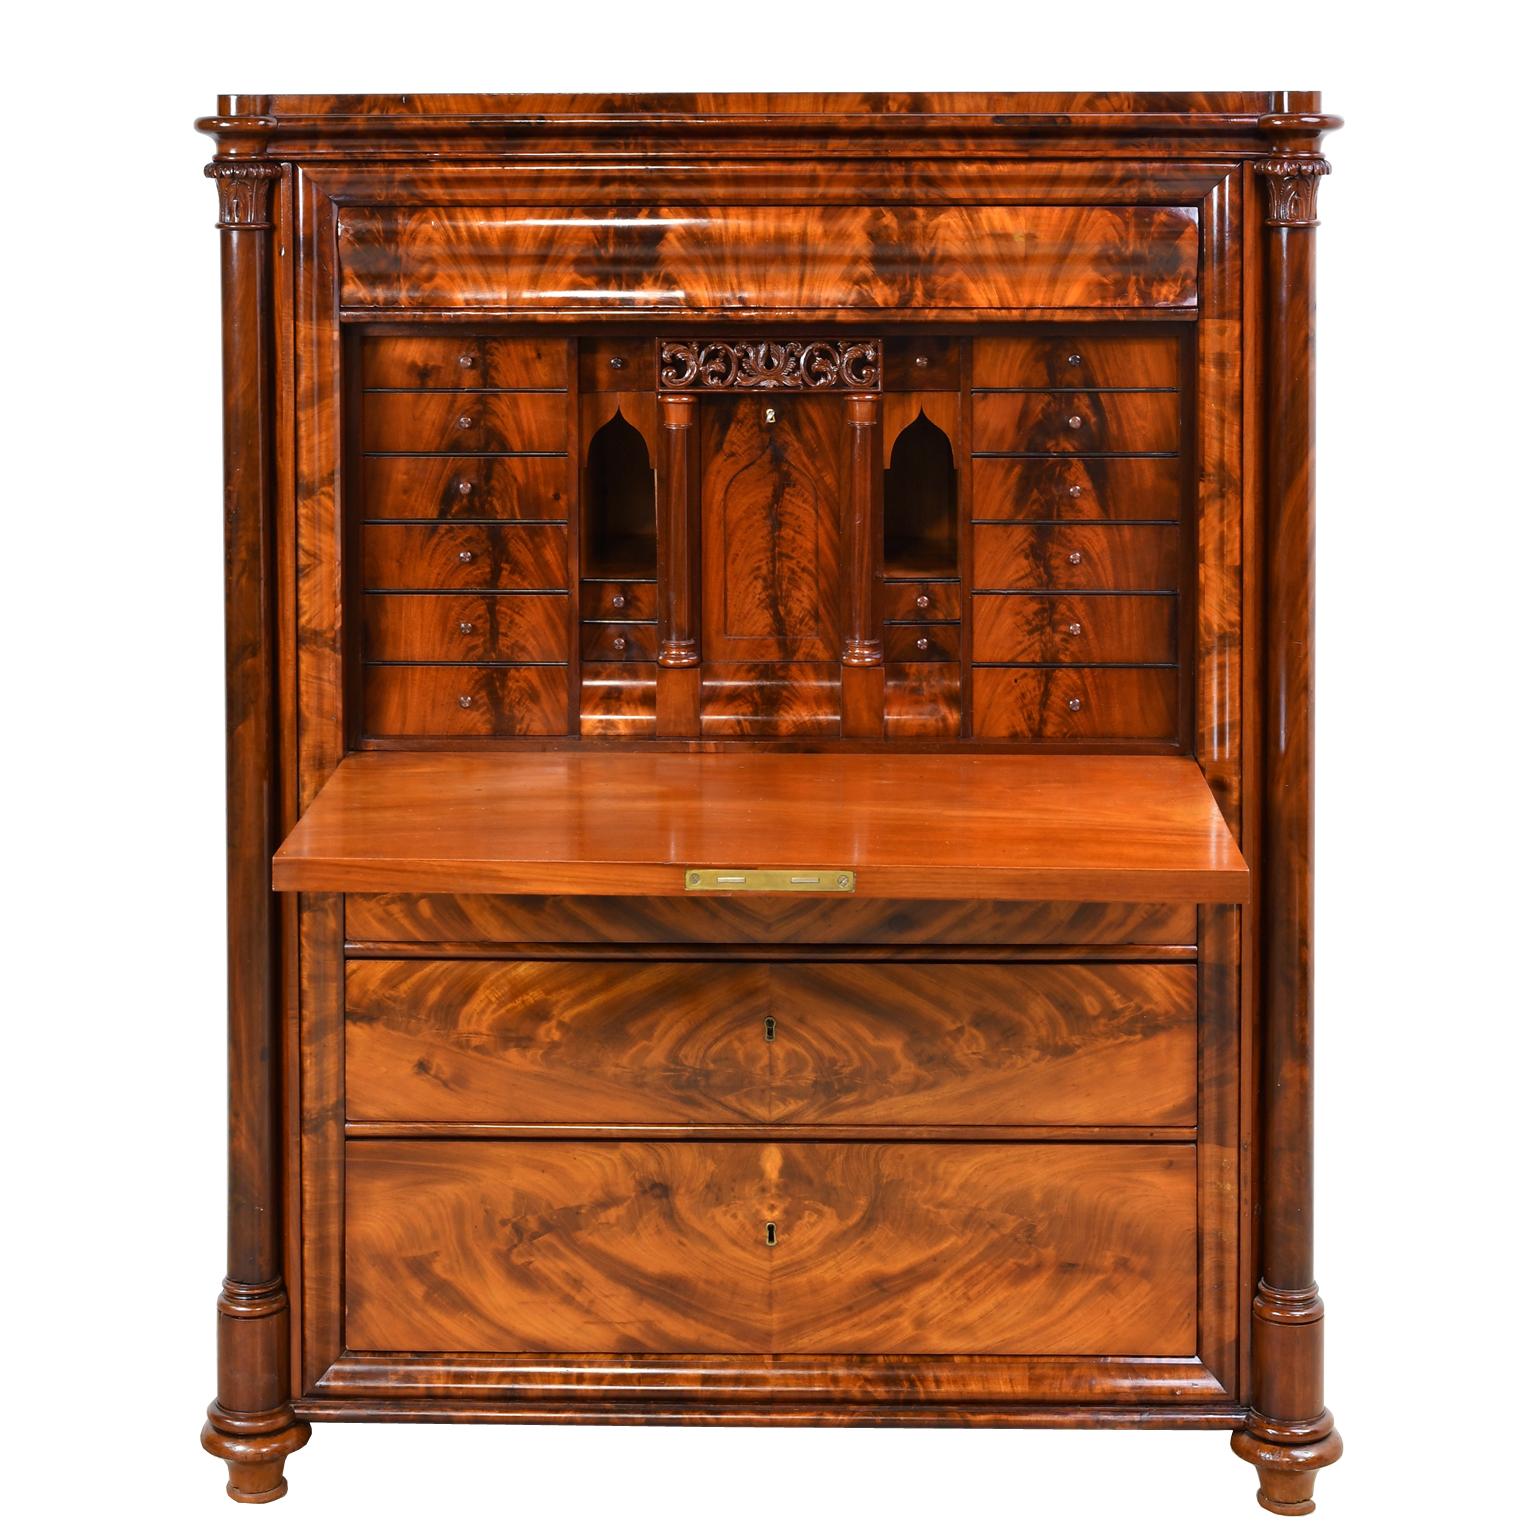 Hand-Crafted Swedish Fall-Front Secretary in West Indies Mahogany, circa 1850